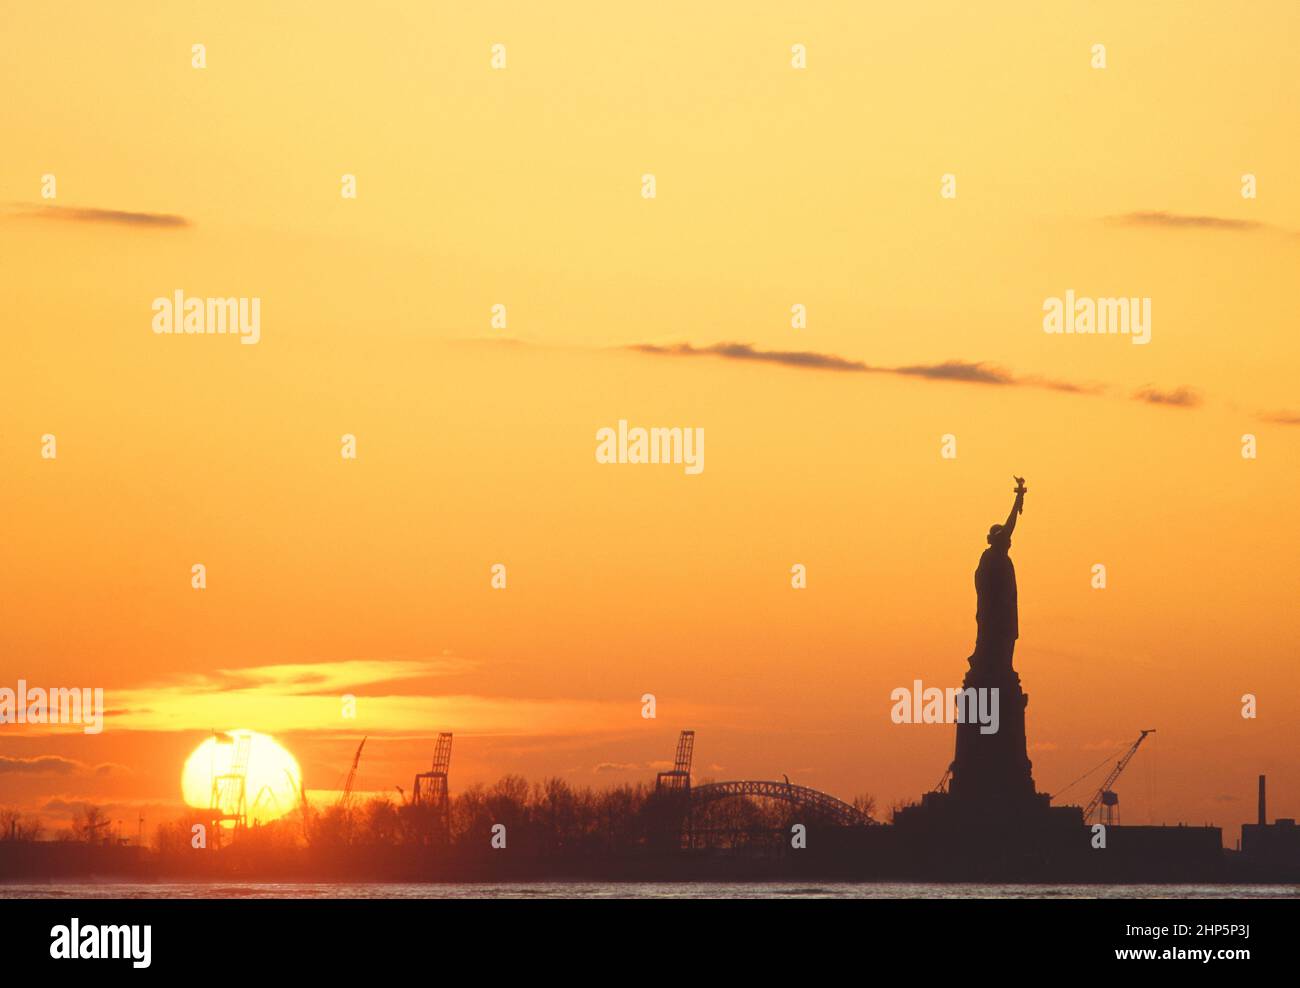 Statue of Liberty at sunset. New York Harbor setting sun. American dream landmark monument on Liberty Island. Immigration in United States of America. Stock Photo